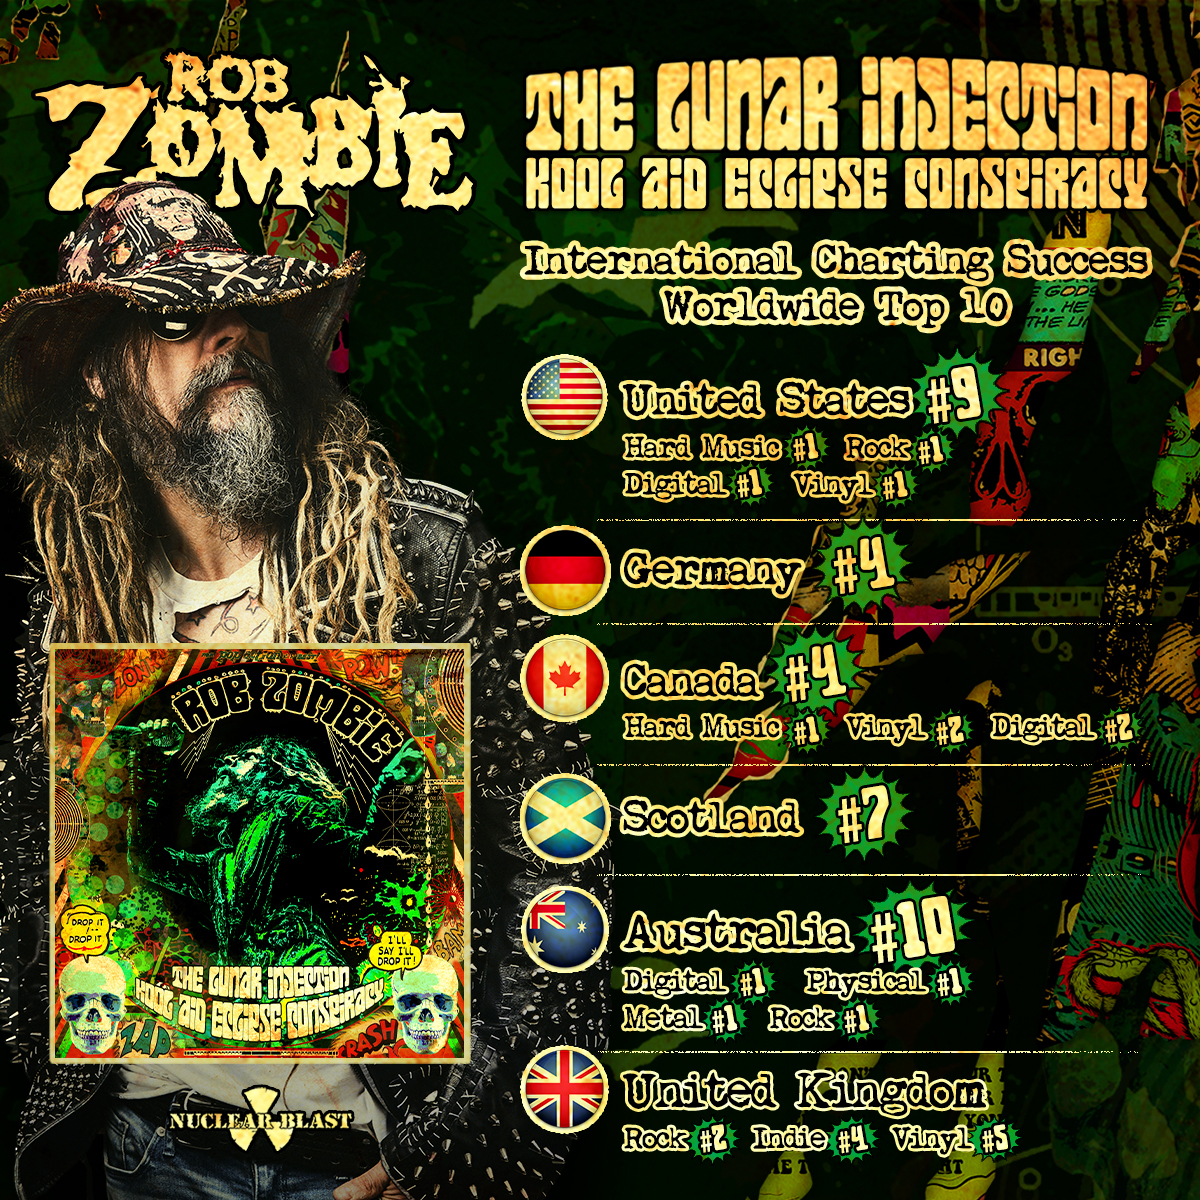 Rob Zombie Releases Second Installment Of Zombie Interviews Zombie!